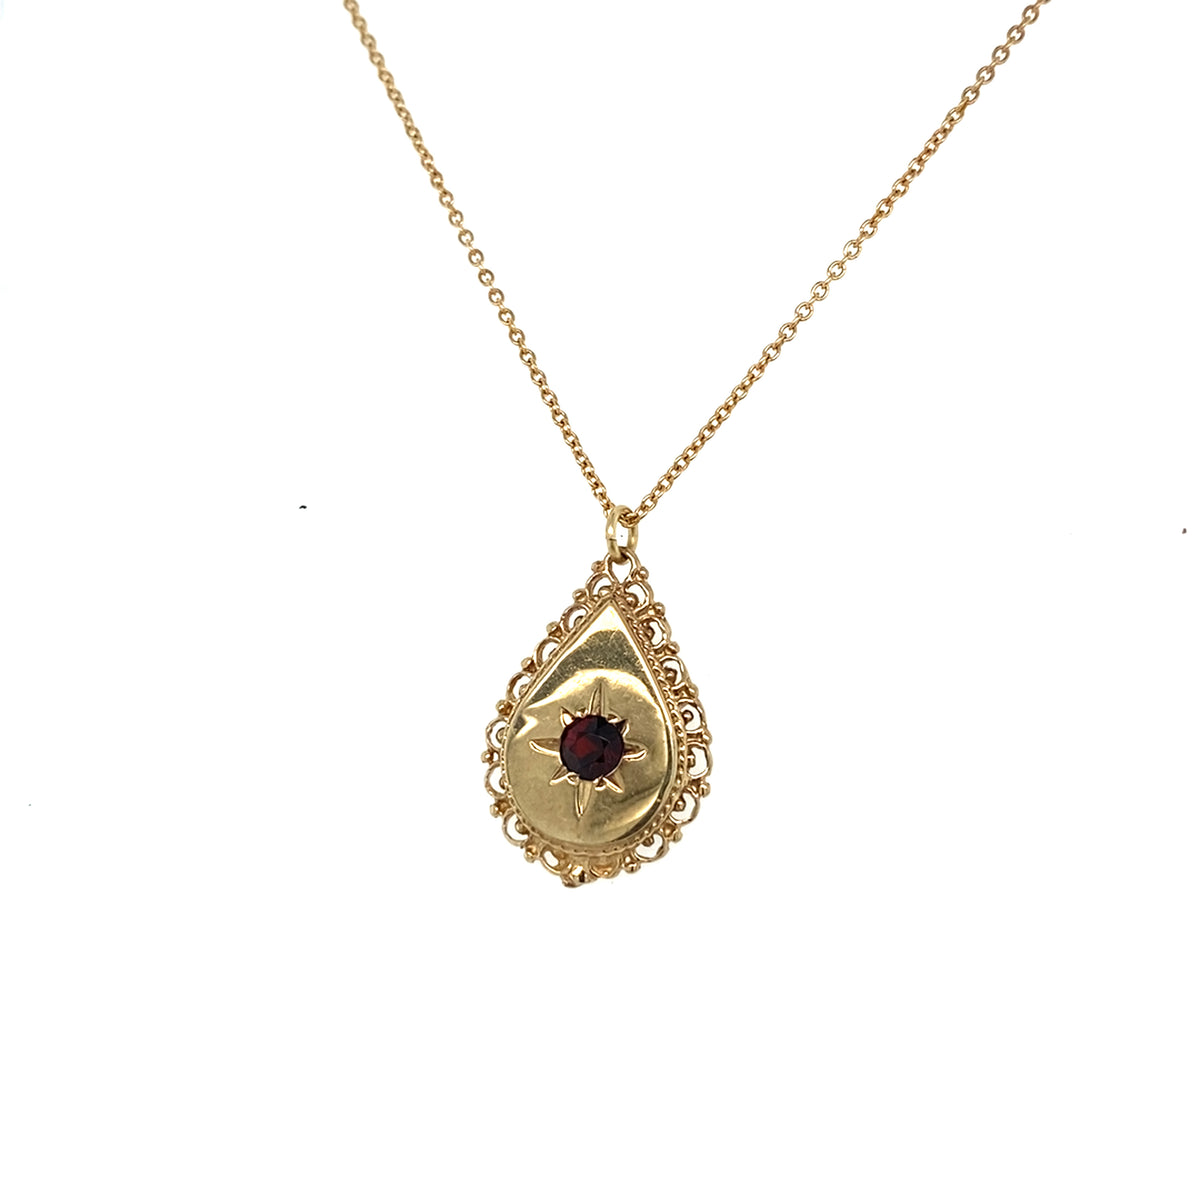 9kt Gold Pear Shaped Pendant with Centre Garnet Stone